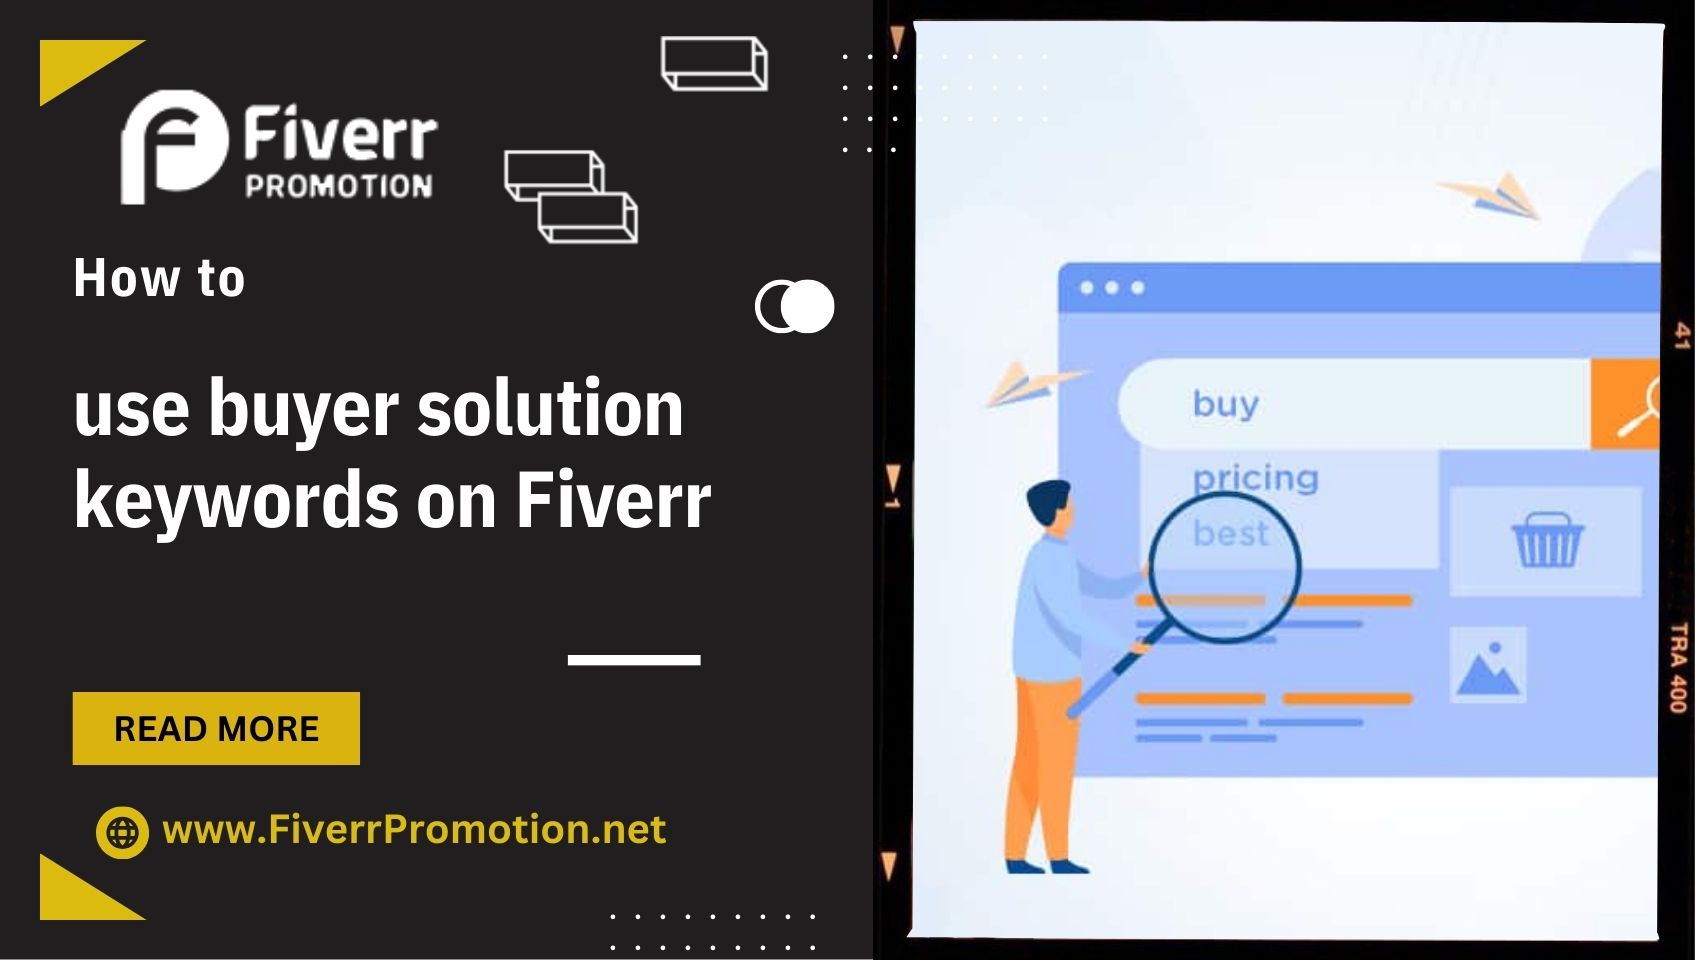 How to use buyer solution keywords on Fiverr